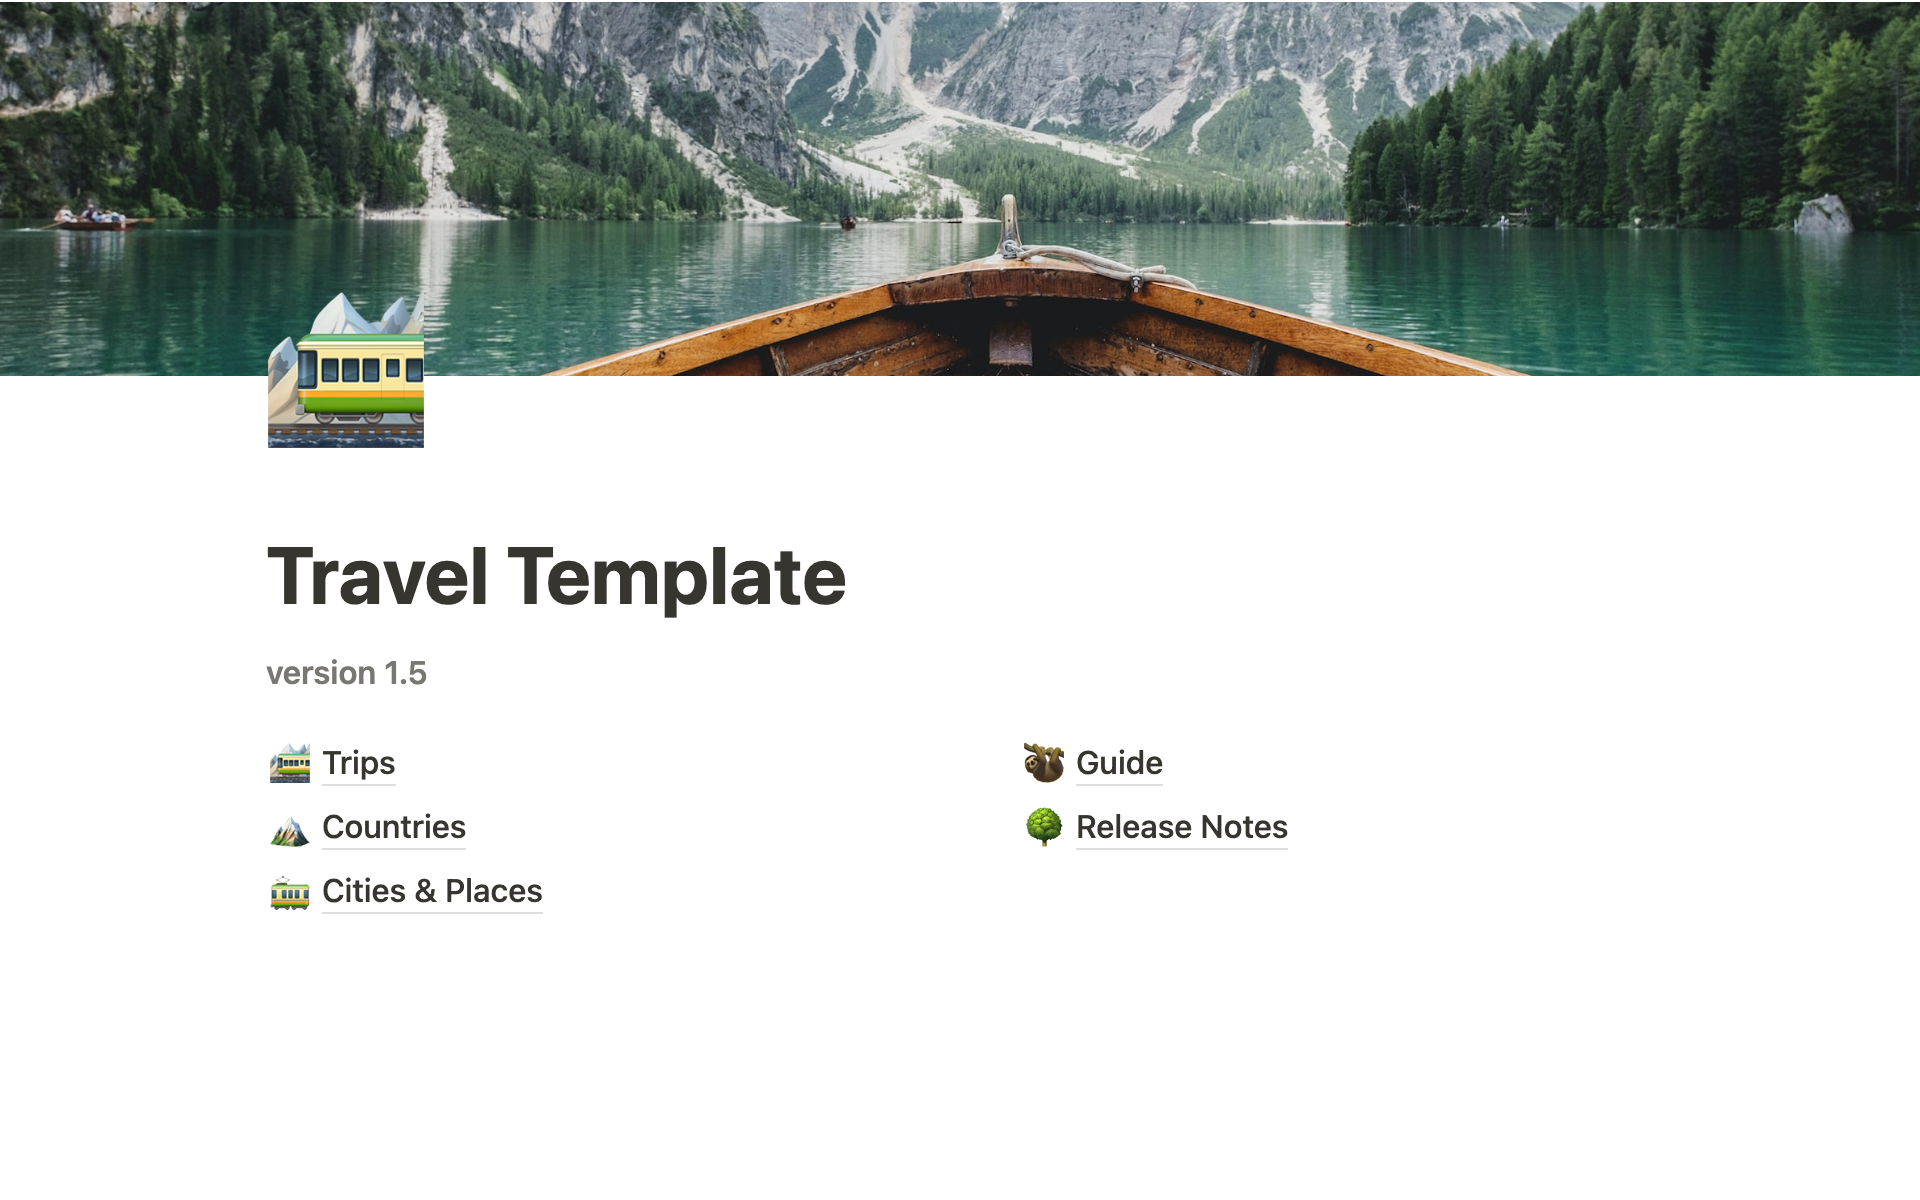 This template is here to help you organize and manage all your visited countries and cities in a simple yet powerful way.